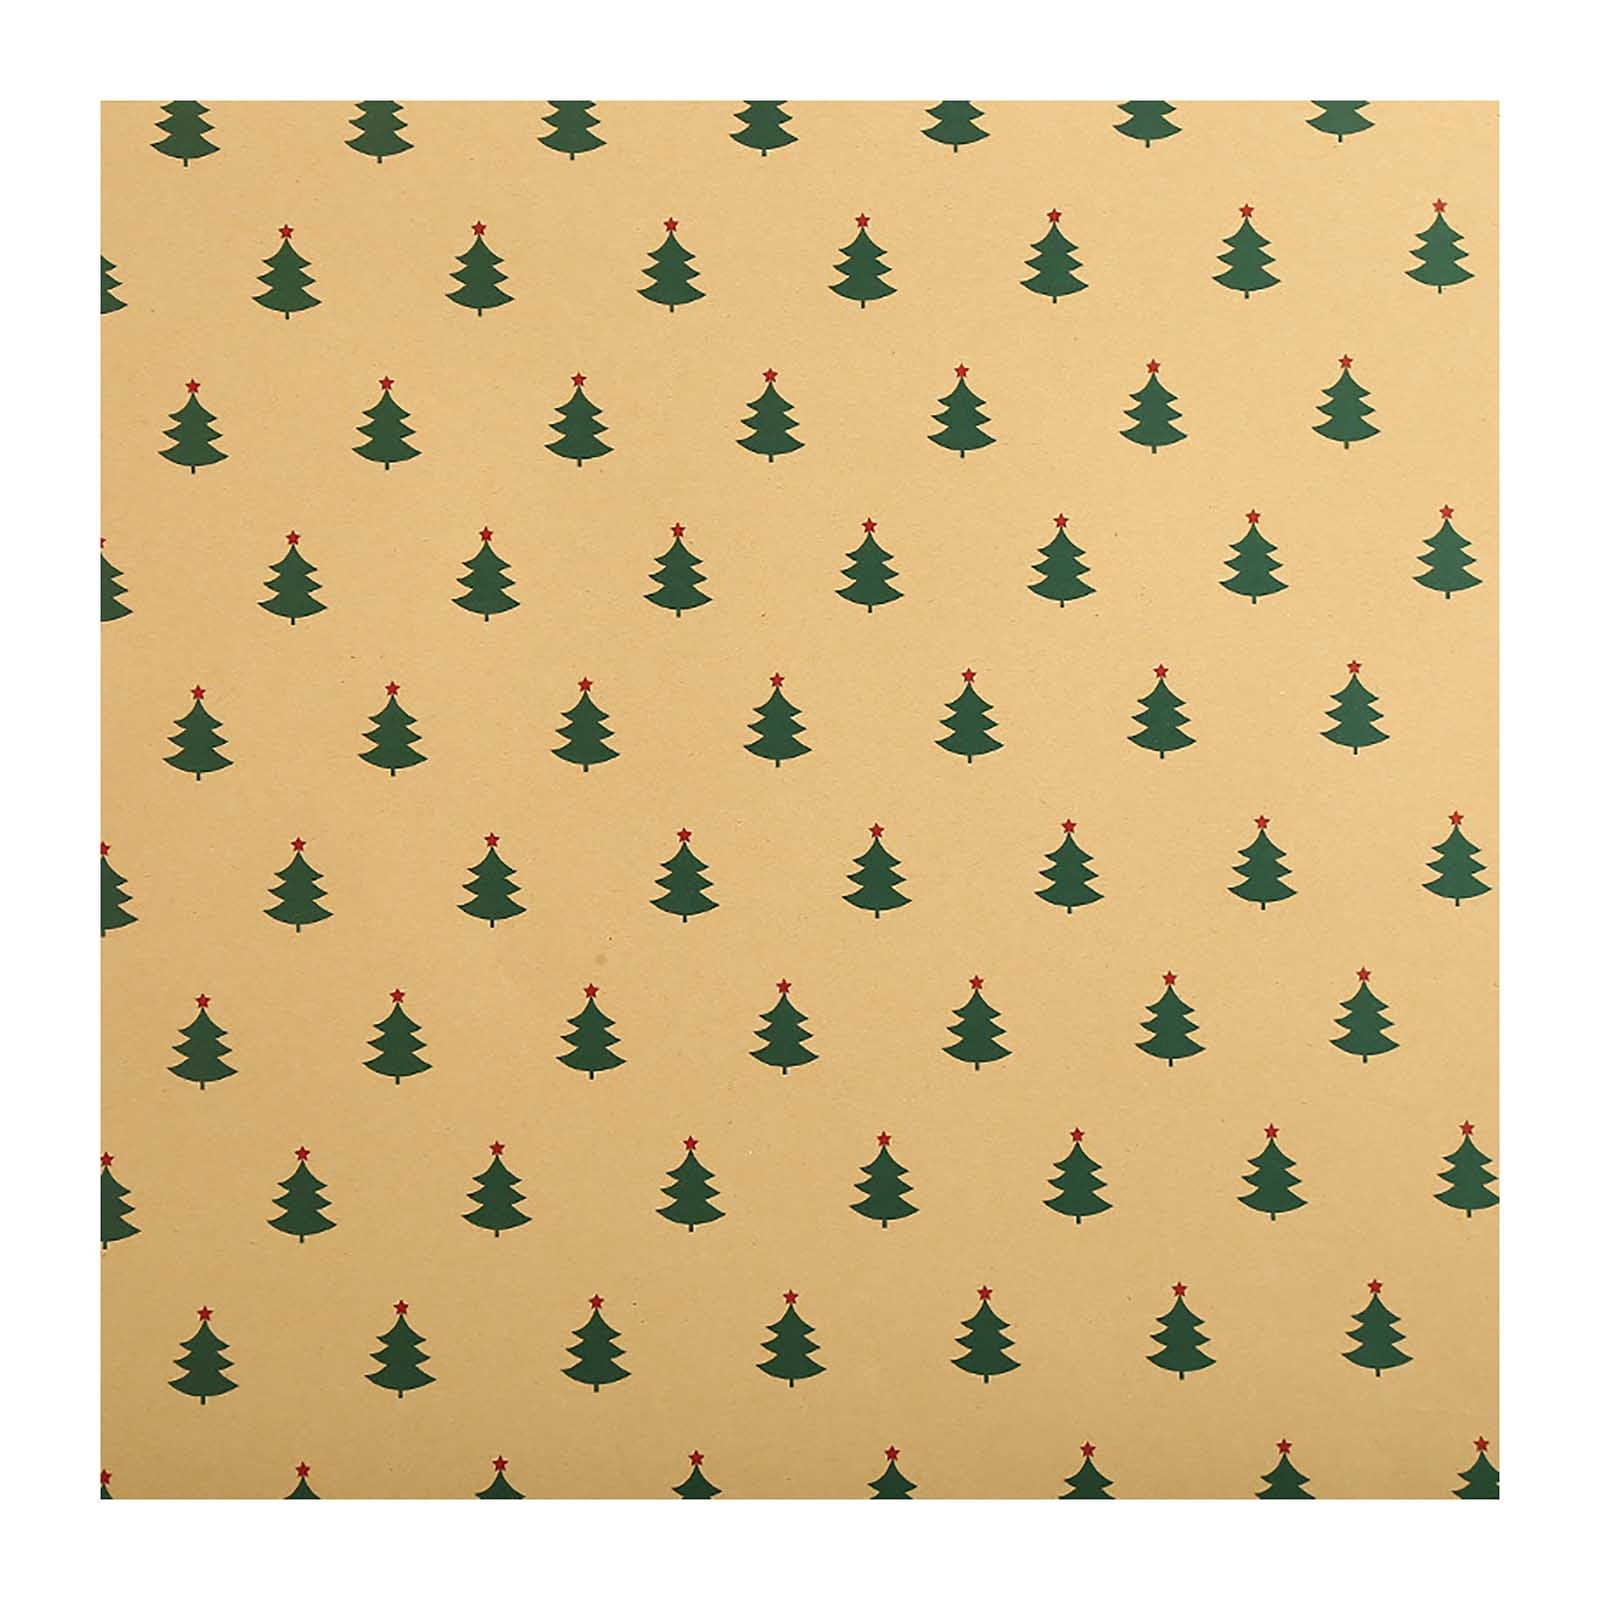 Sobeikre 1PC DIY Men's Women's Children's Christmas Wrapping Paper Wrapping  Truck Plaid Snowflake Green Tree Christmas Design Snowflake Christmas